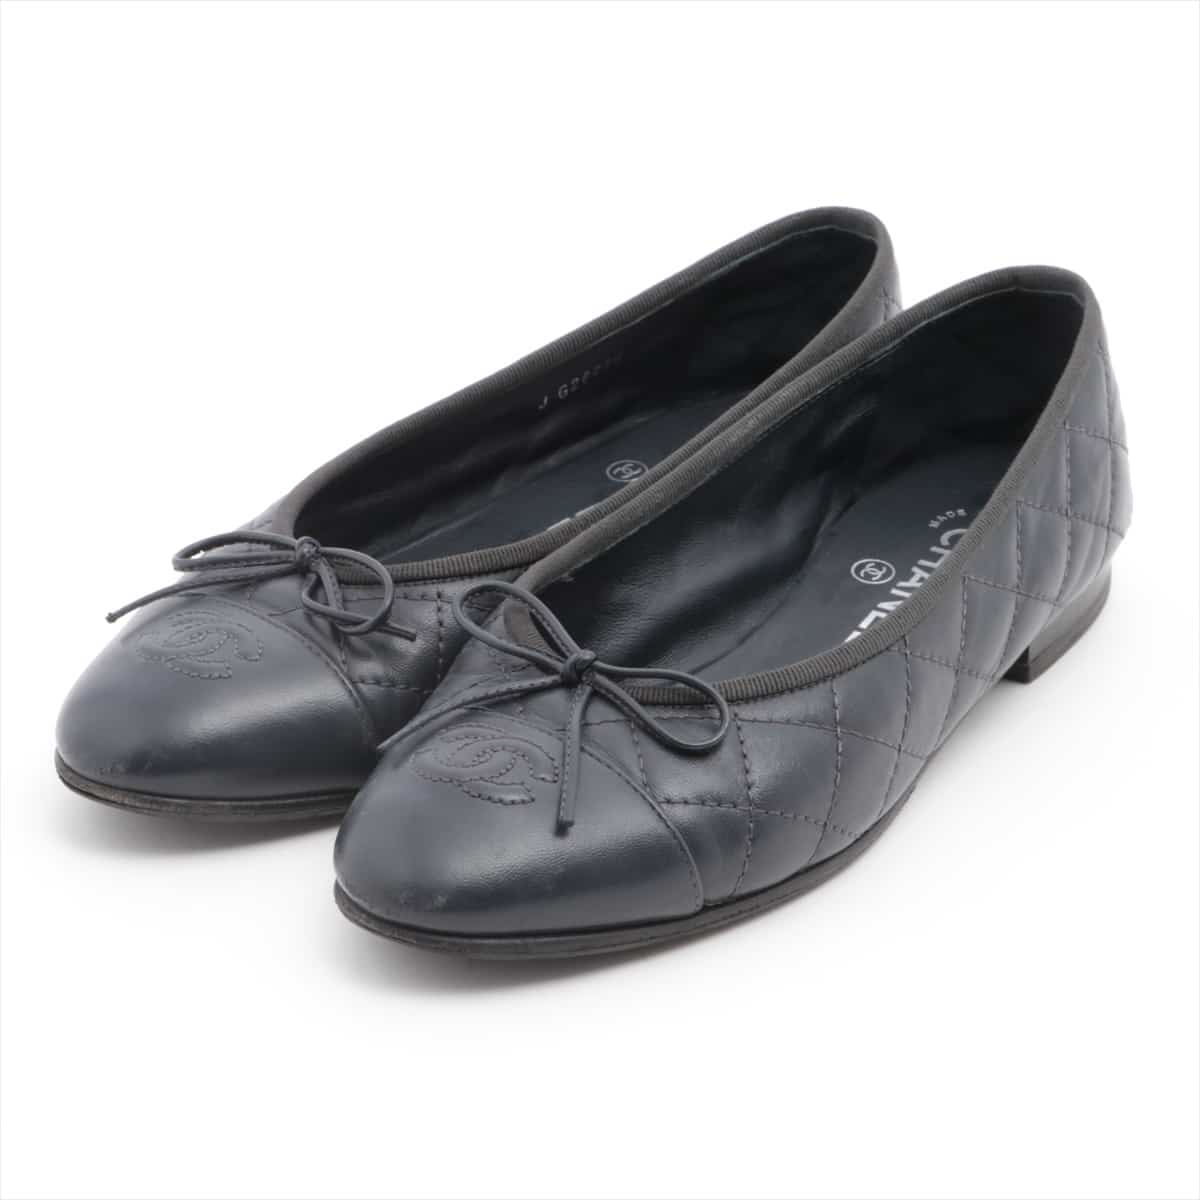 Chanel Coco Mark Matelasse 18AW Leather Flat Pumps 37 1/2 Ladies' Navy blue G26250 There are lift repairs